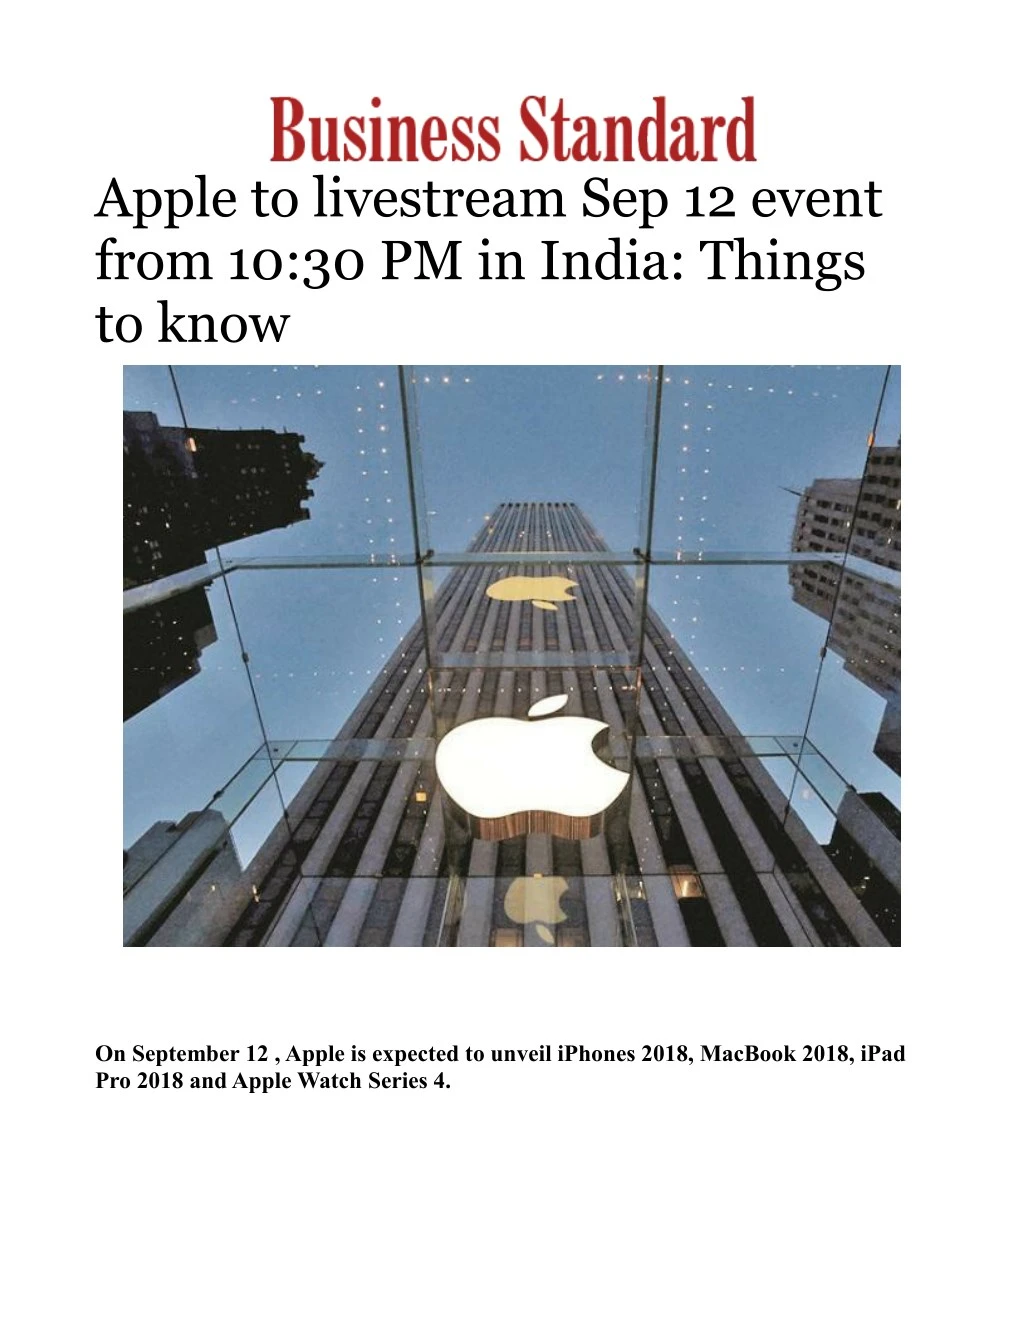 apple to livestream sep 12 event from